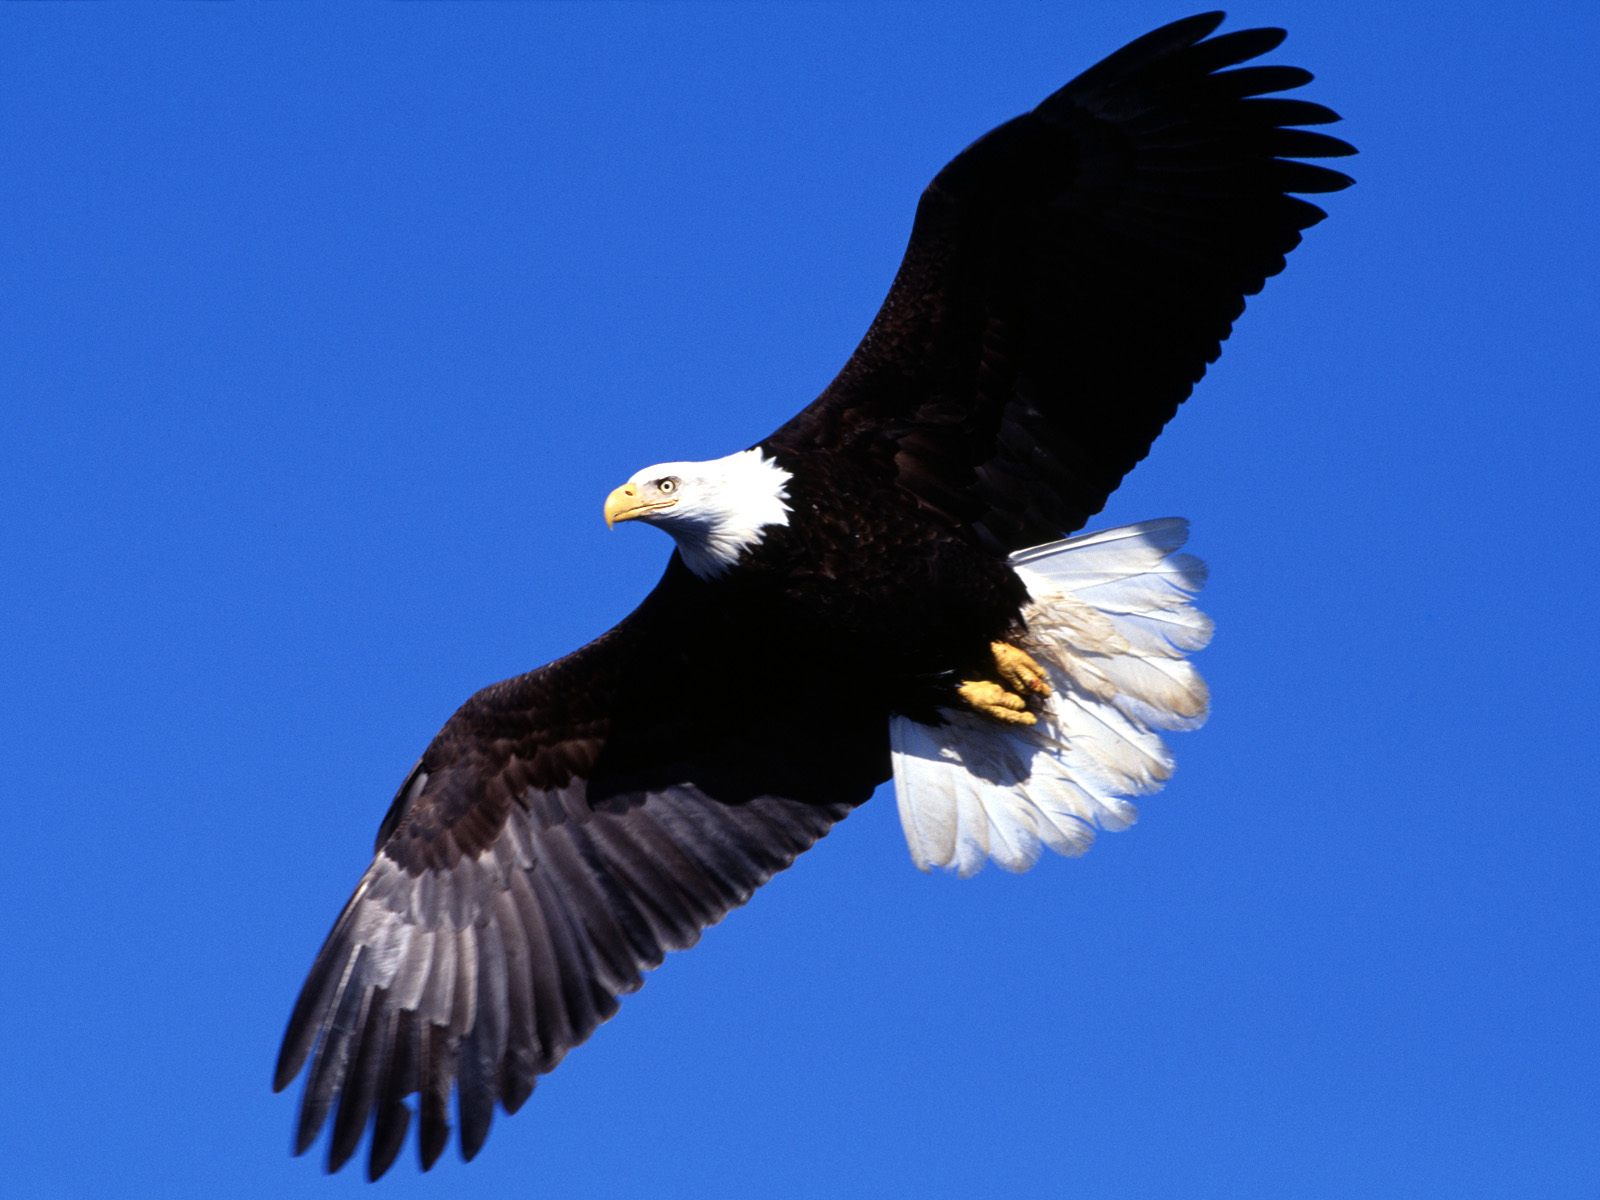 Flying Eagle Wallpaper 9438 Hd Wallpapers in Animals   Imagescicom